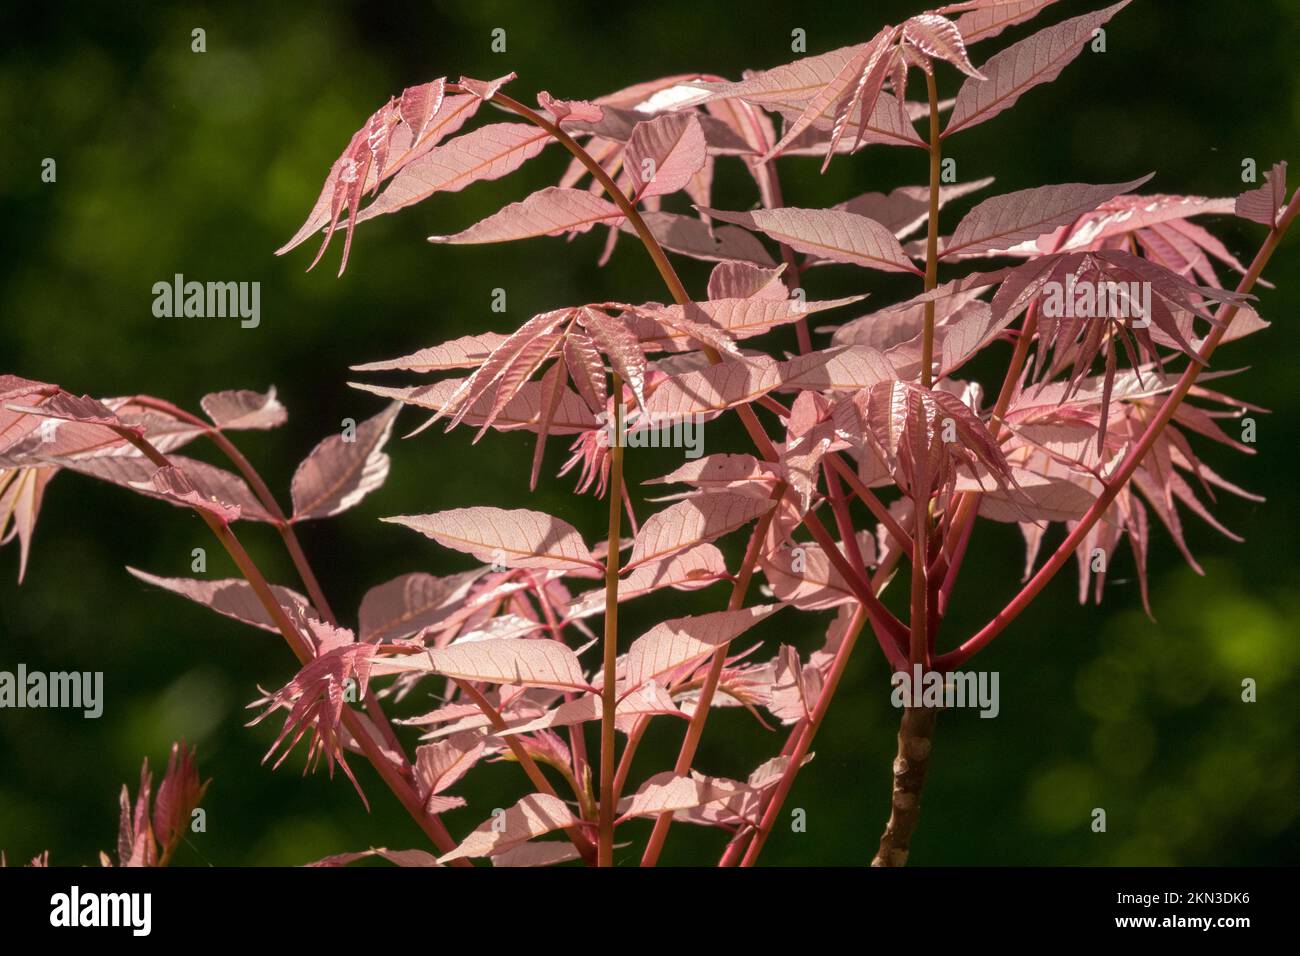 Beef and Onion Plant, Cedrela sinensis, Chinese Cedar, Chinese Mahogany, Chinese Toona sinensis Flamingo, Salmon, Colour, Leaves, Spring tree Stock Photo